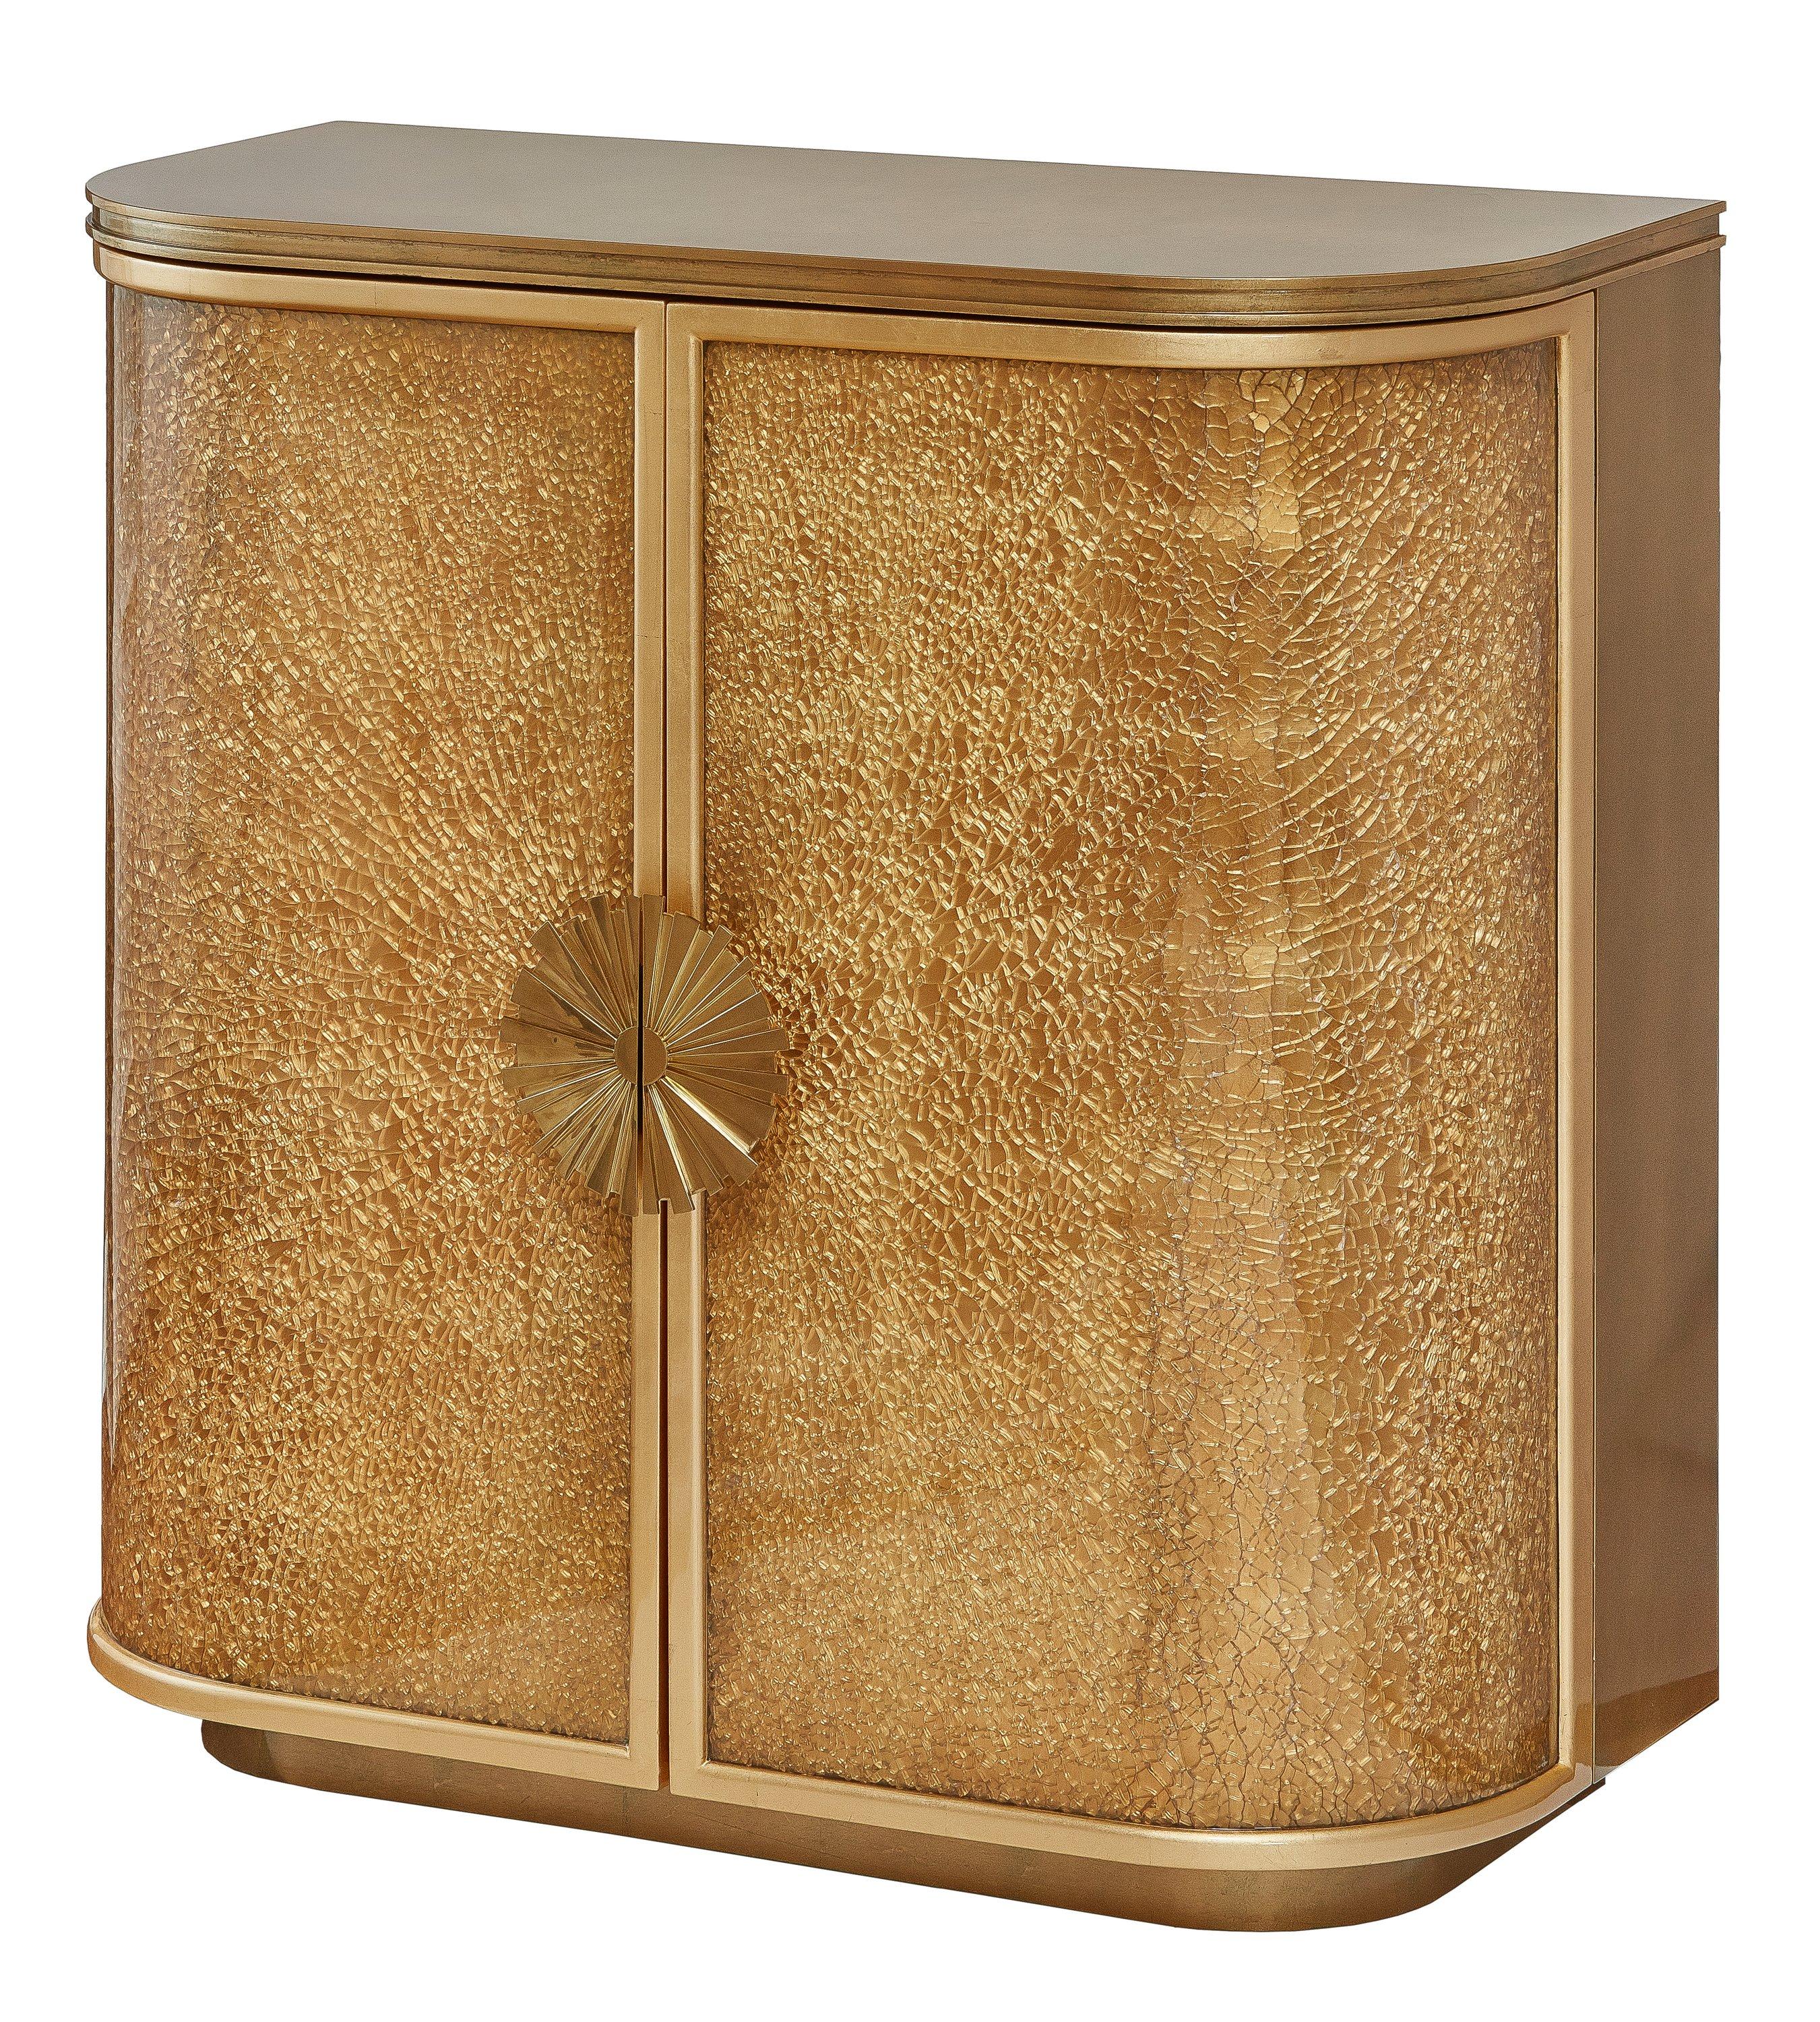 The exceptional cabinet with doors made of cracked or shattered glass texture curved panels. This difficult and unique technology gives crystalline spider web of cracks, which marvelously change light reflected from the gold leaf surface beneath the